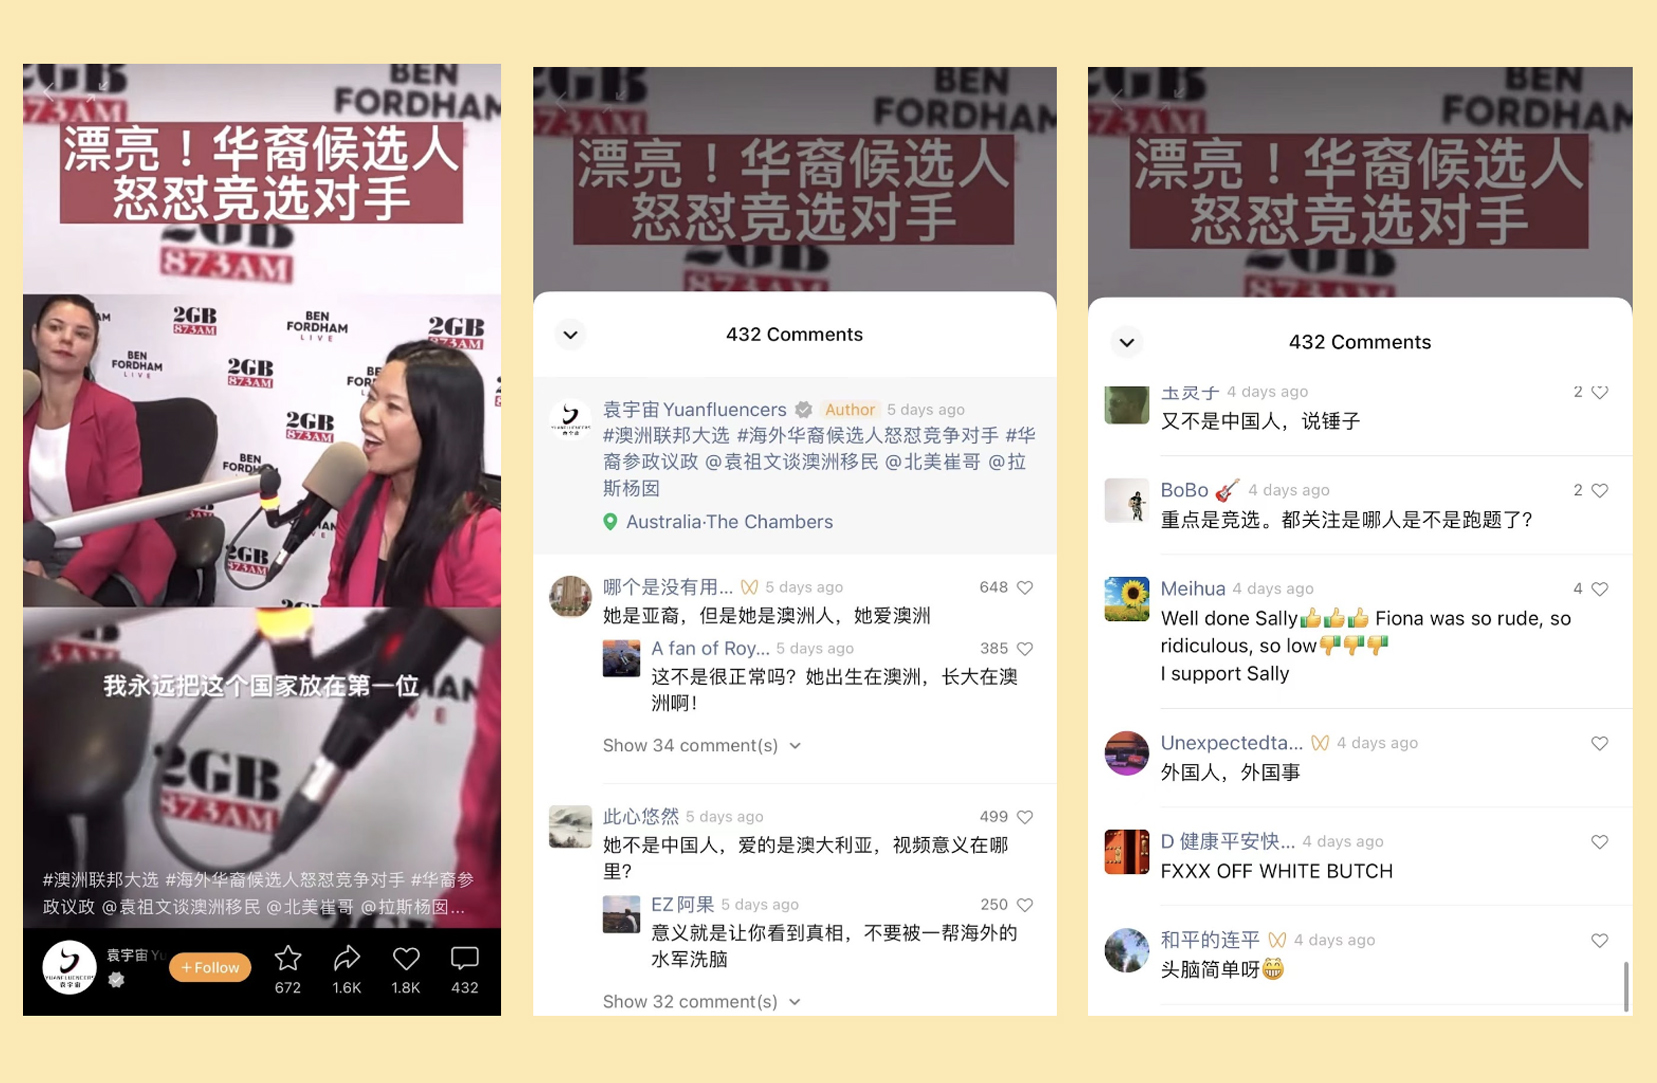 Screenshots of a post on WeChat including comments using Chinese characters